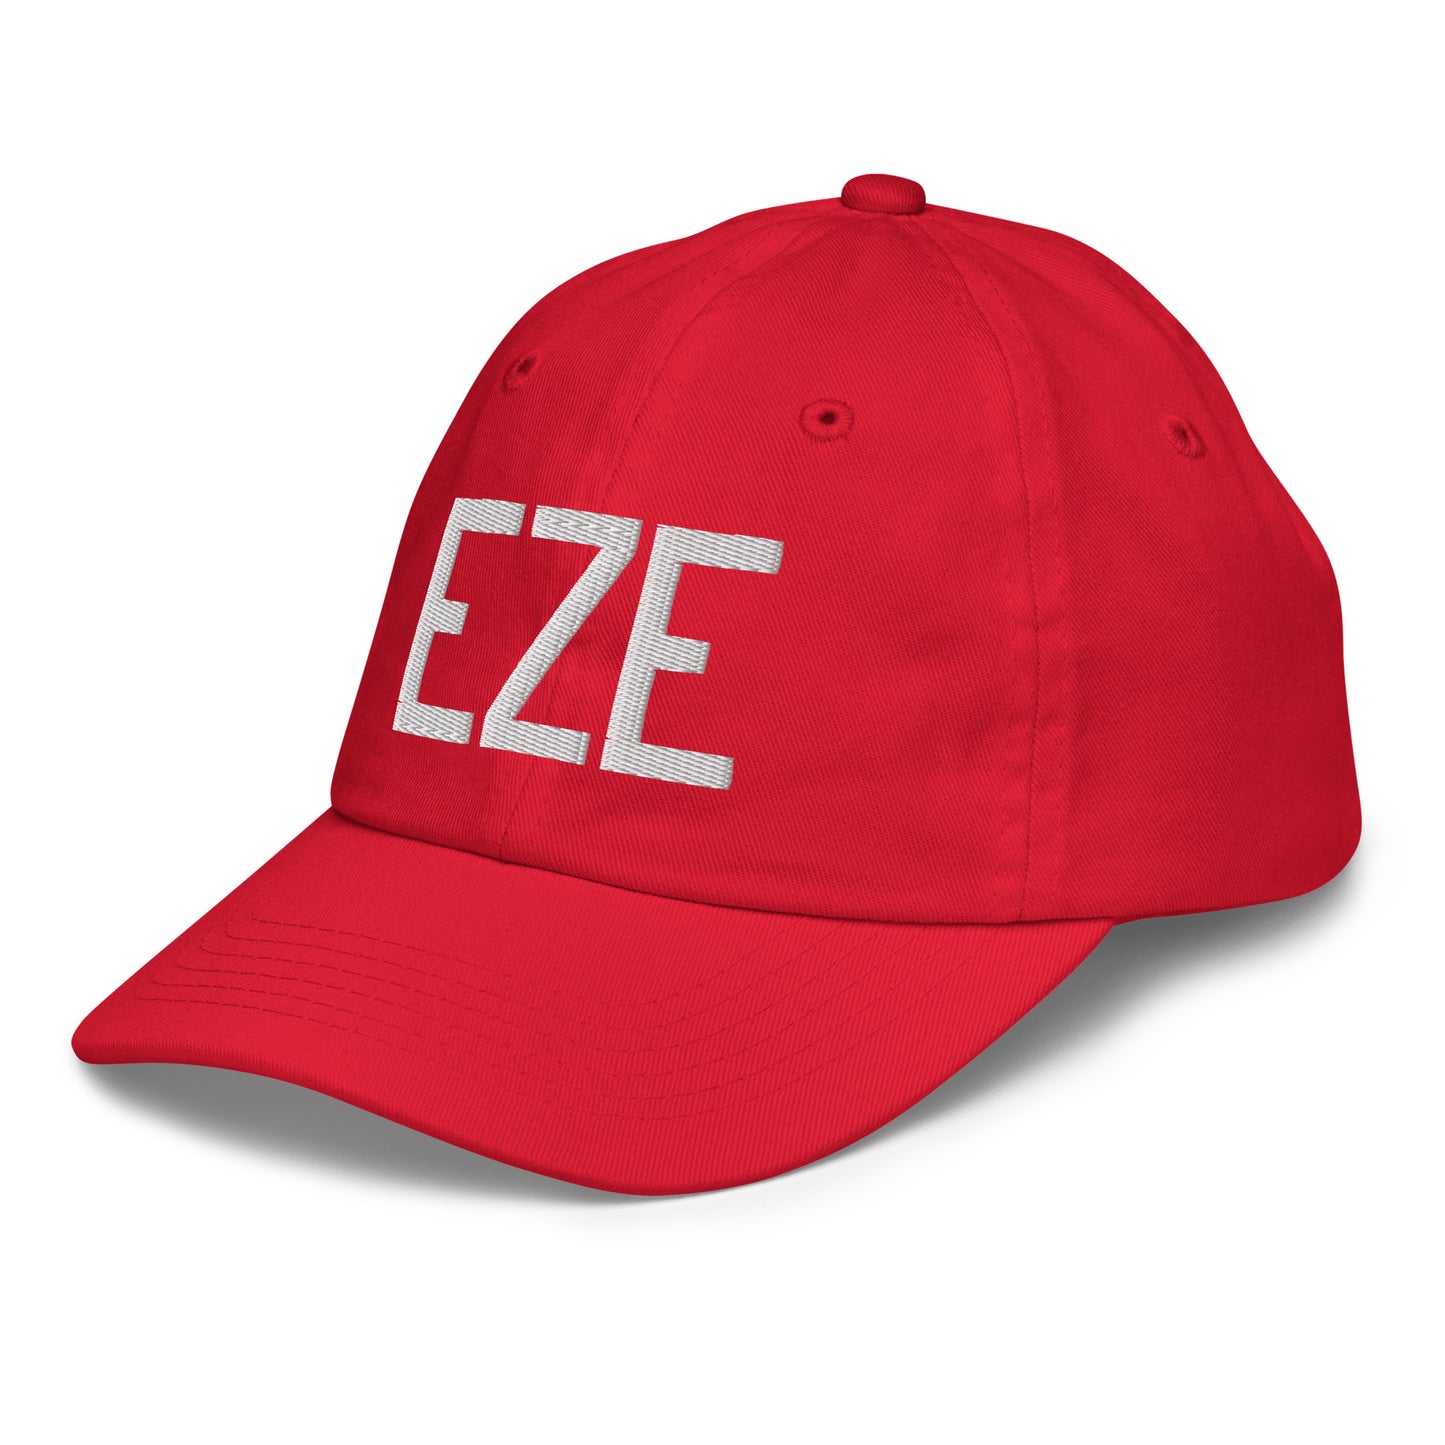 Airport Code Kid's Baseball Cap - White • EZE Buenos Aires • YHM Designs - Image 19